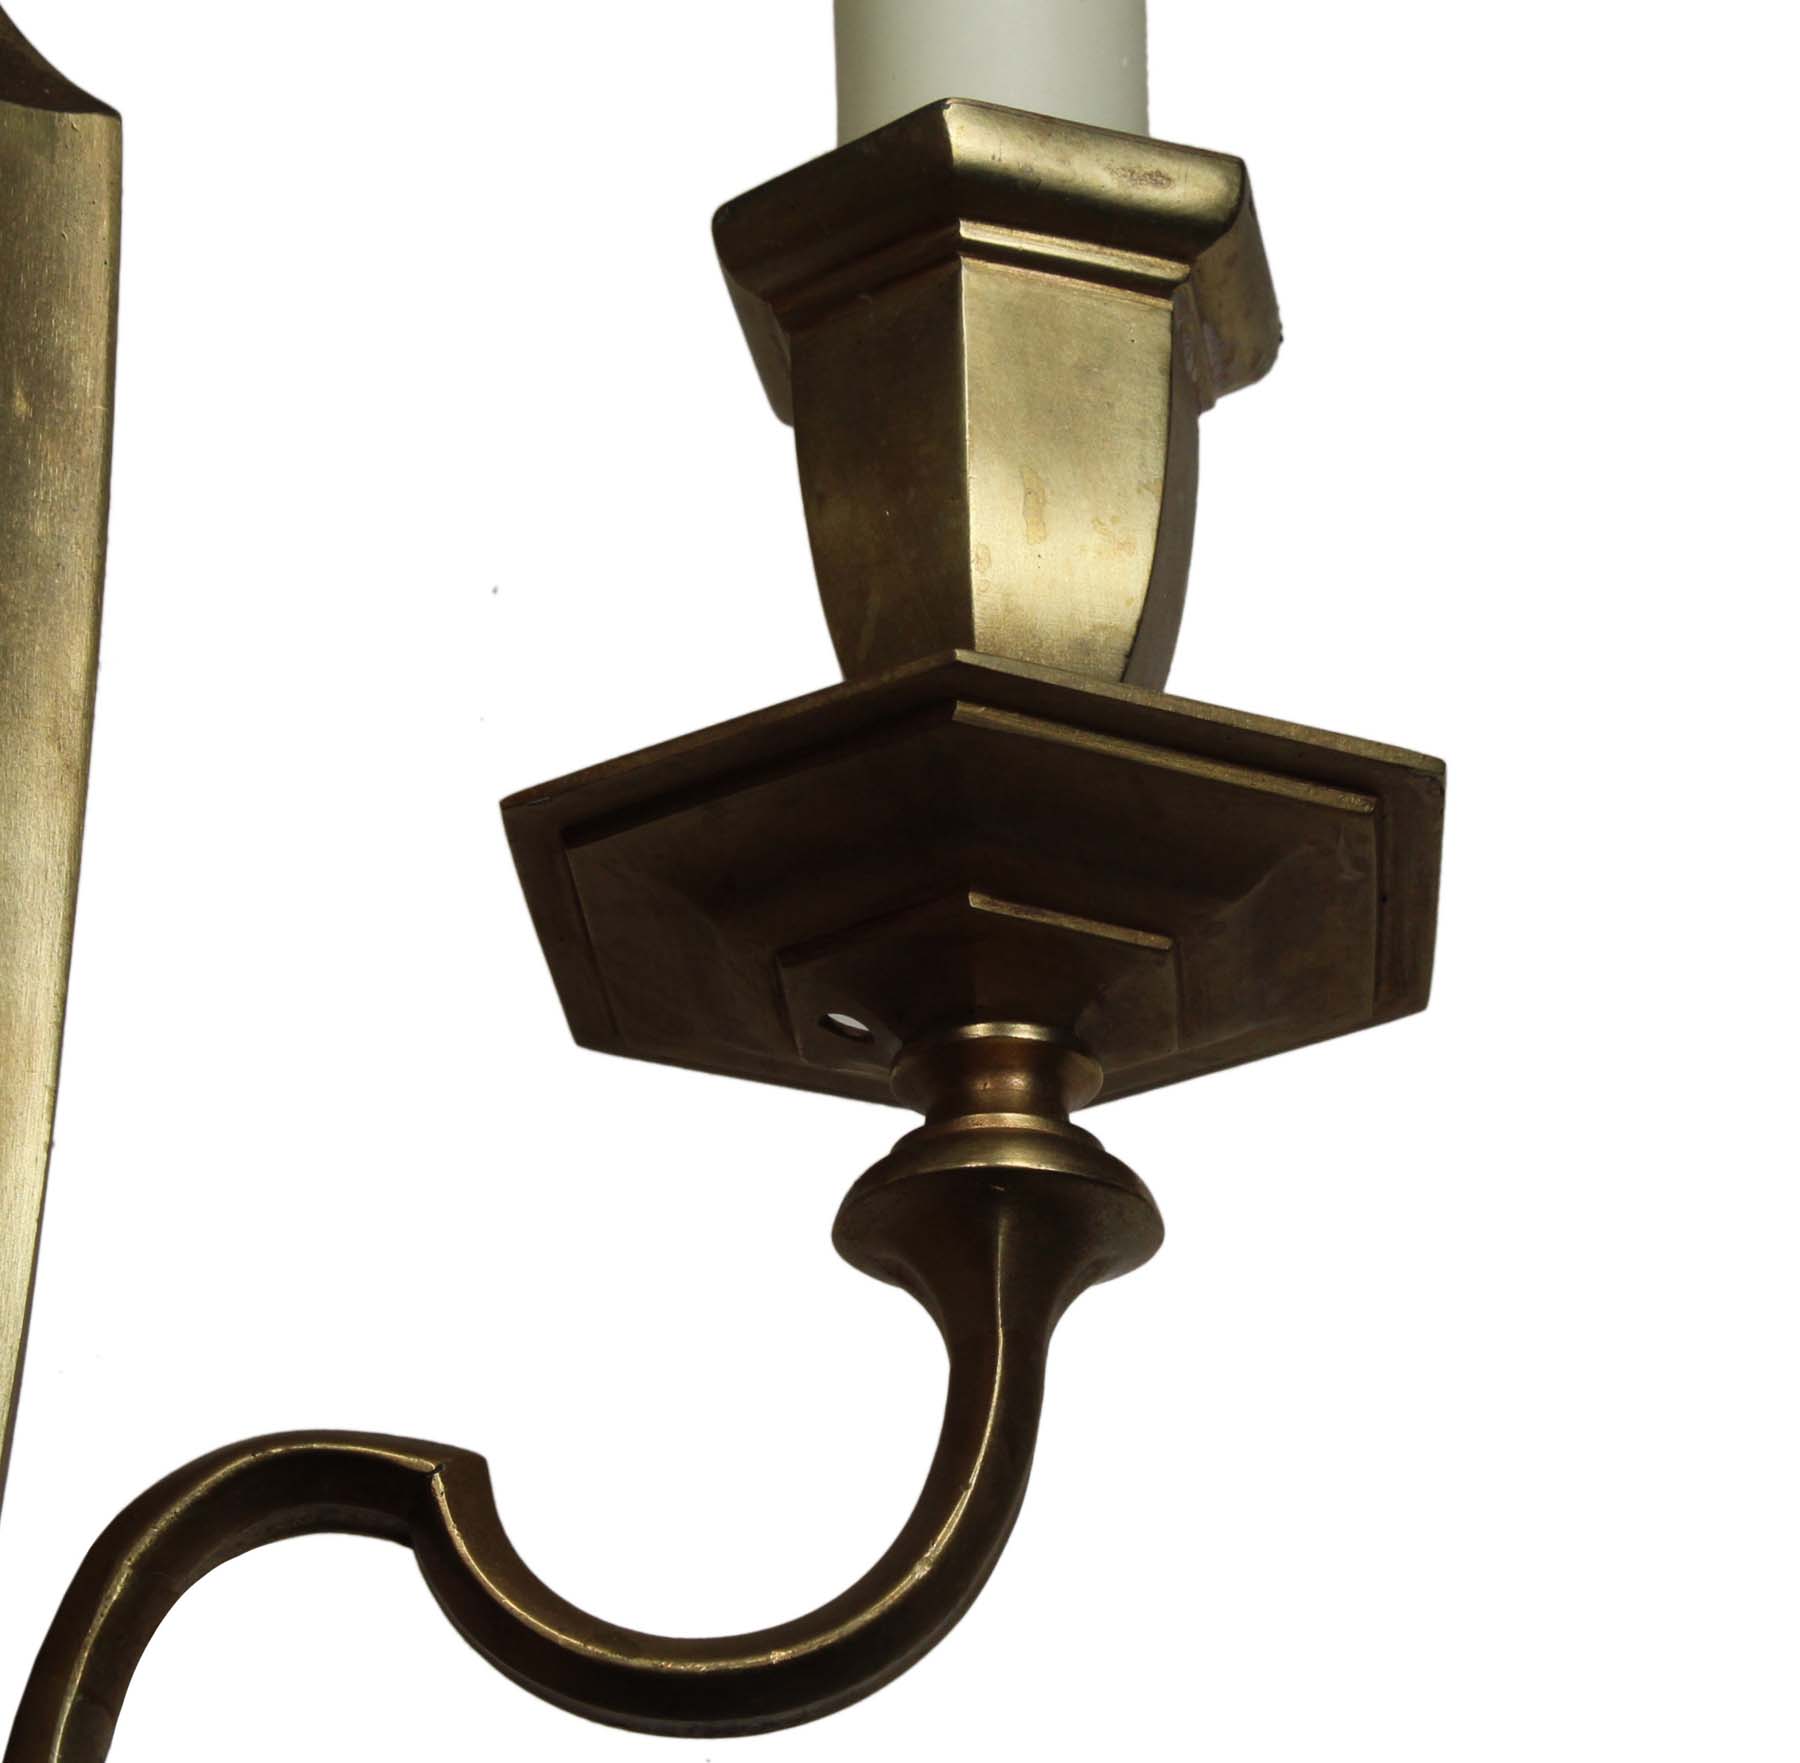 Exceptional Pairs of Antique Double-Arm Sconces, Signed E. F. Caldwell-68340